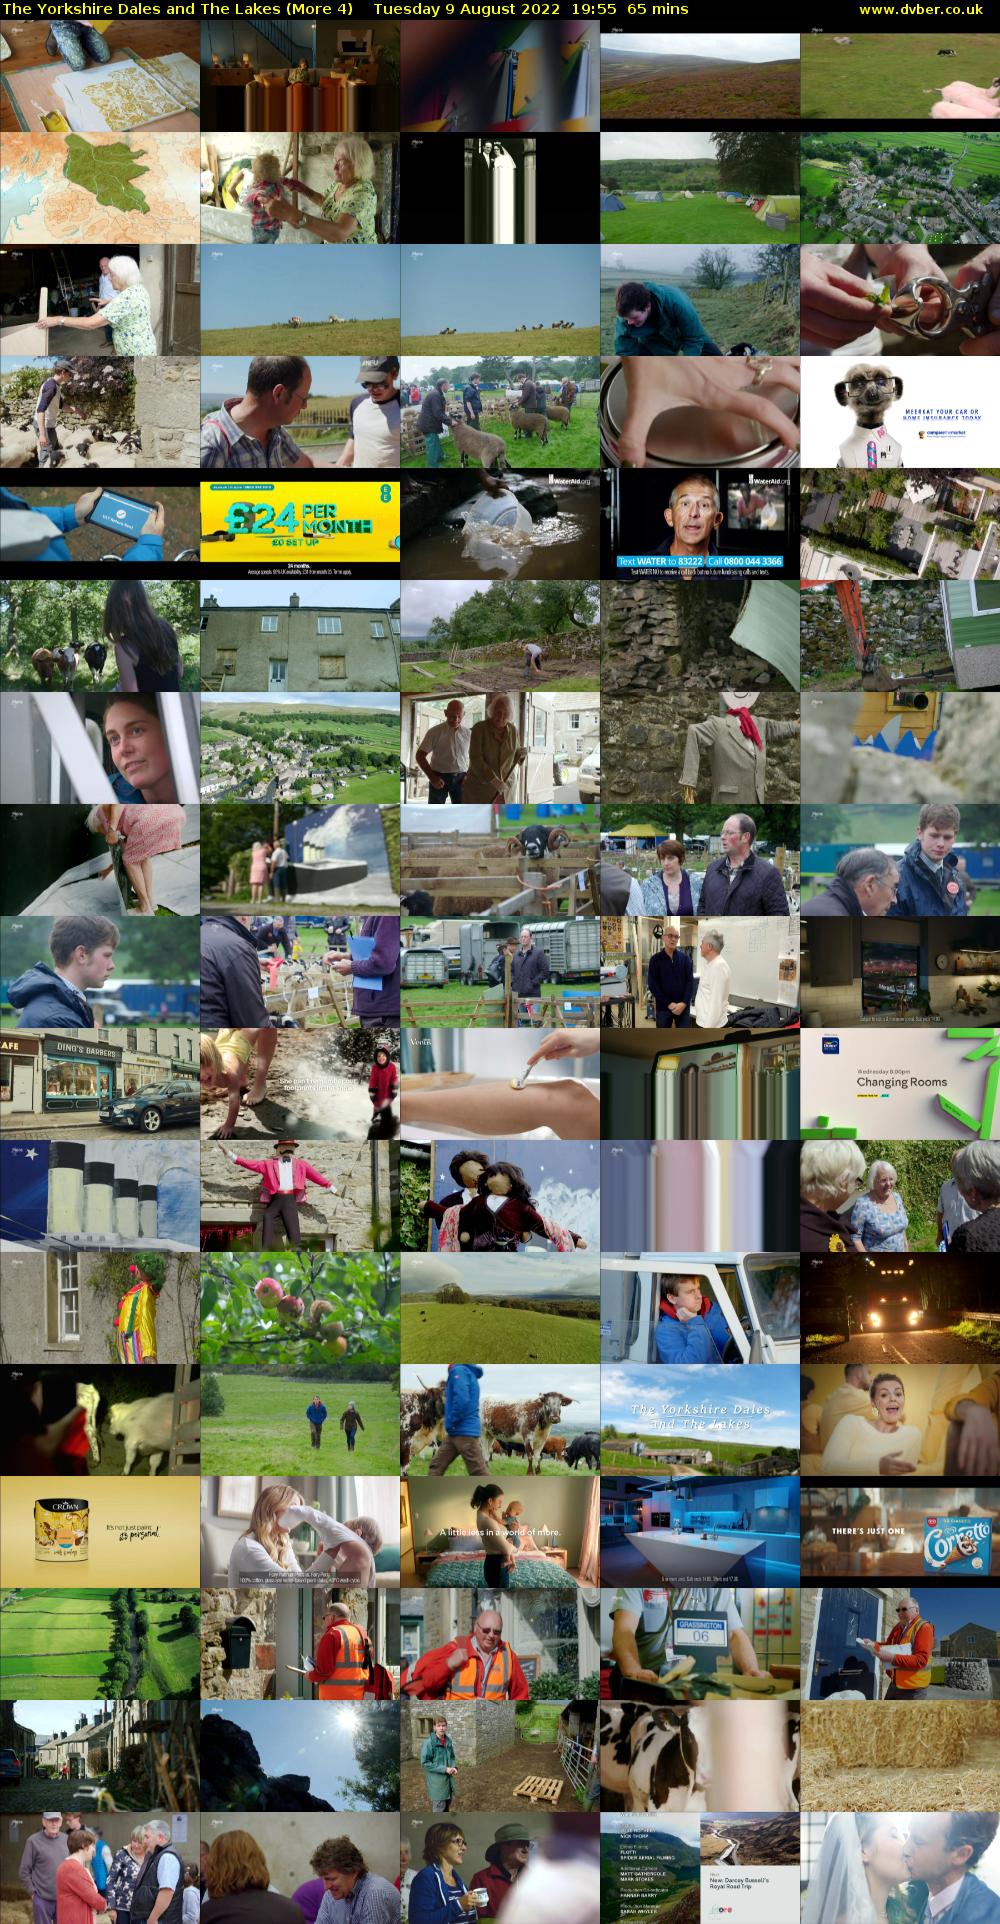 The Yorkshire Dales and The Lakes (More 4) Tuesday 9 August 2022 19:55 - 21:00